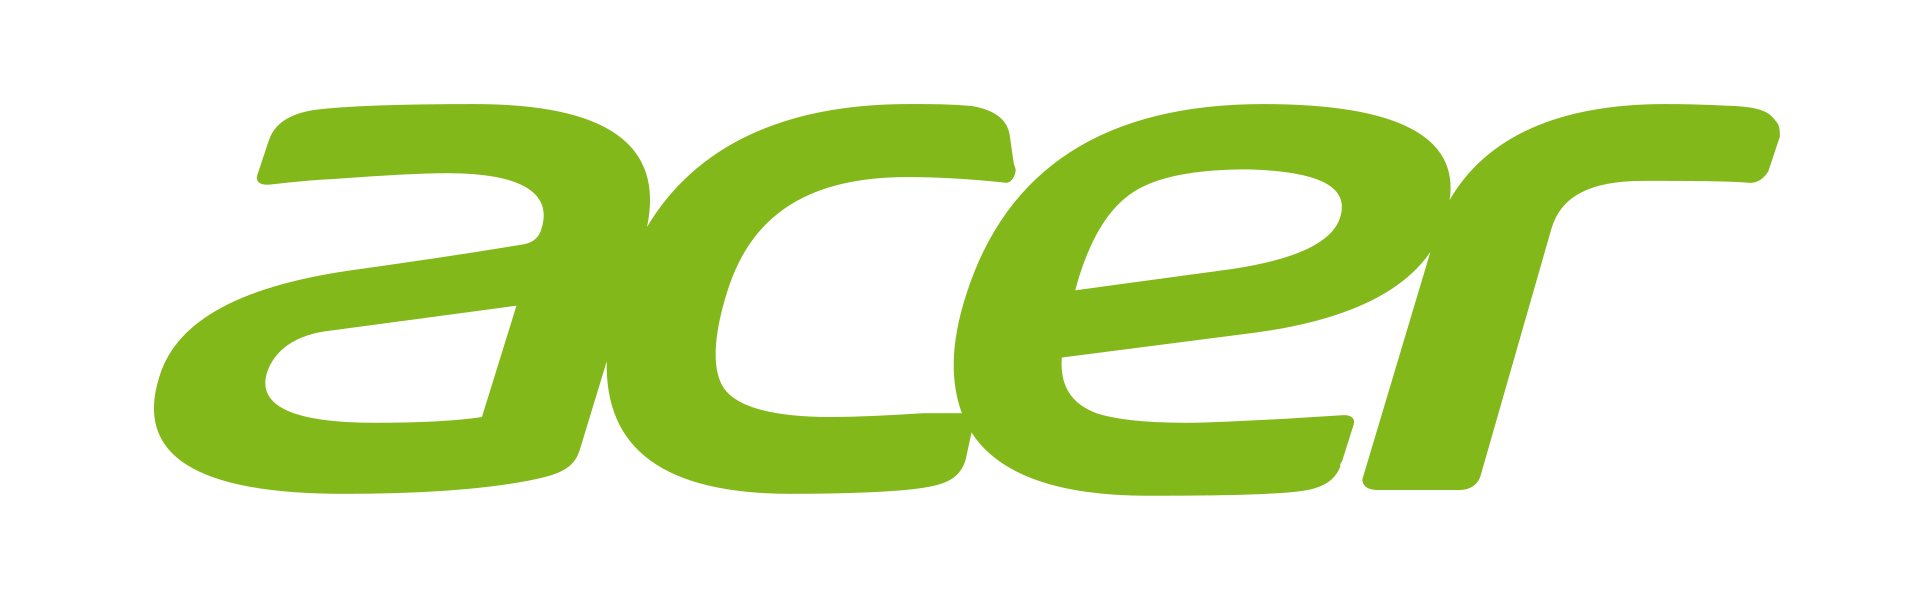 The logo of acer